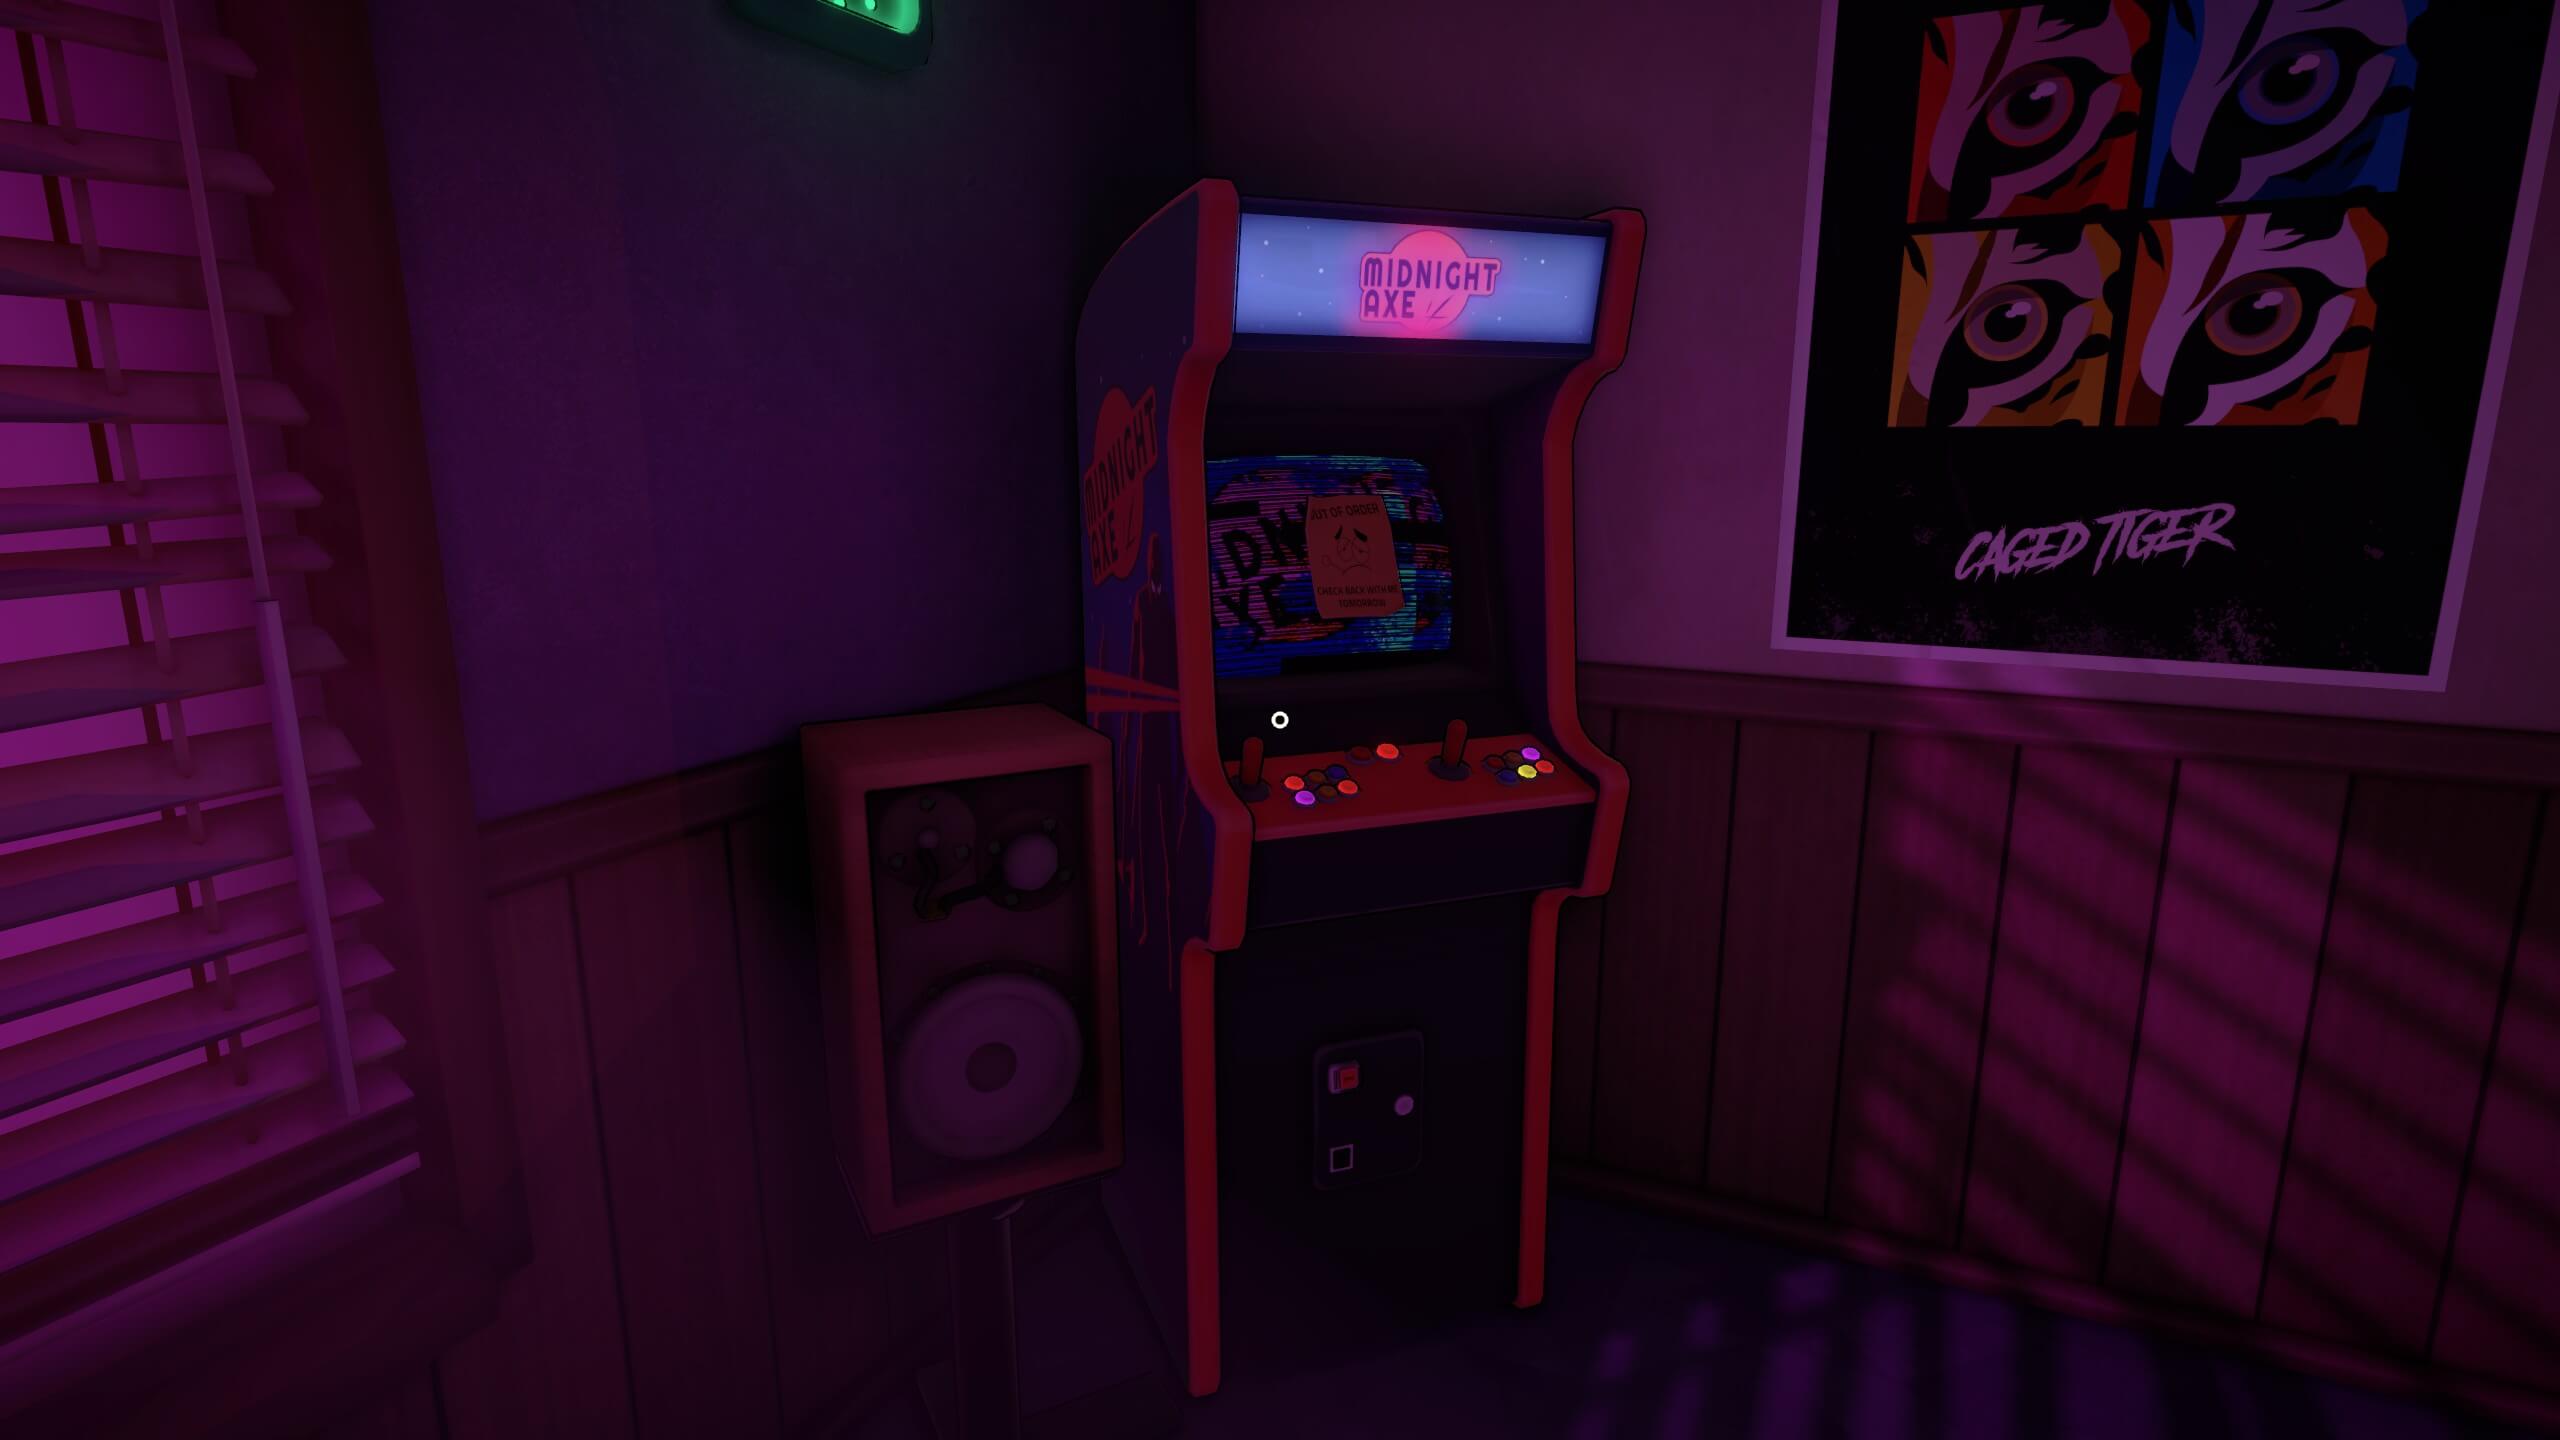 an arcade machine in the staff recreation area has an out of order sign on it. There is also a poster of Caged Tiger and a small speaker. To the left are window blinds and the small emergency light is poking down from the top of the screen.